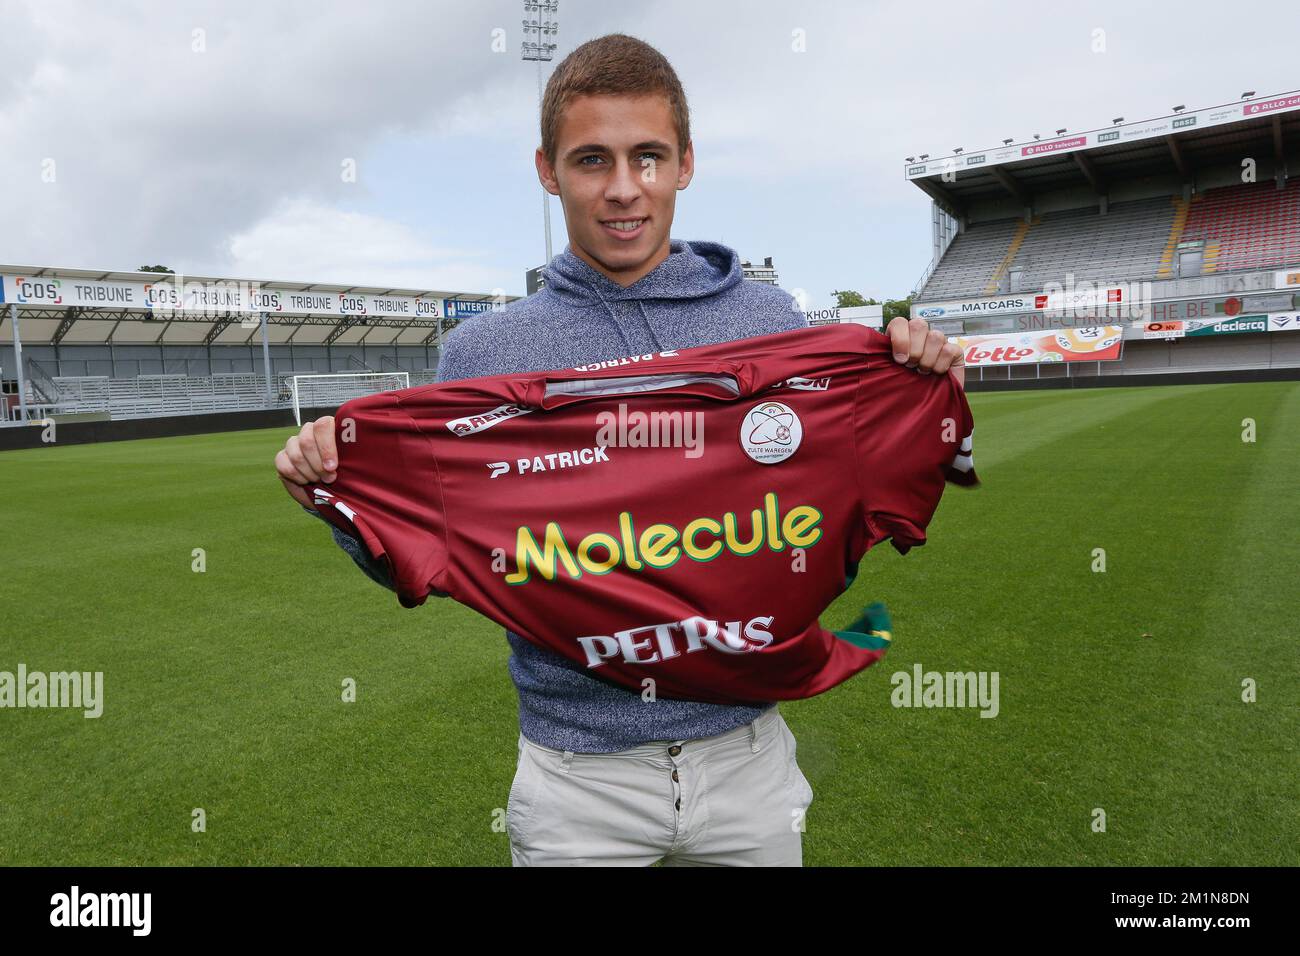 20120831 - WAREGEM, BELGIUM: Essevee's Thorgan Hazard poses with his new shirt after a press conference to present a new player at Belgian first division soccer team SV Zulte Waregem, Friday 31 August 2012 in Waregem. Today Essevee is presenting their latest signing, 19 year old Thorgan Hazard is coming over from Chelsea FC on a loan. BELGA PHOTO BRUNO FAHY Stock Photo